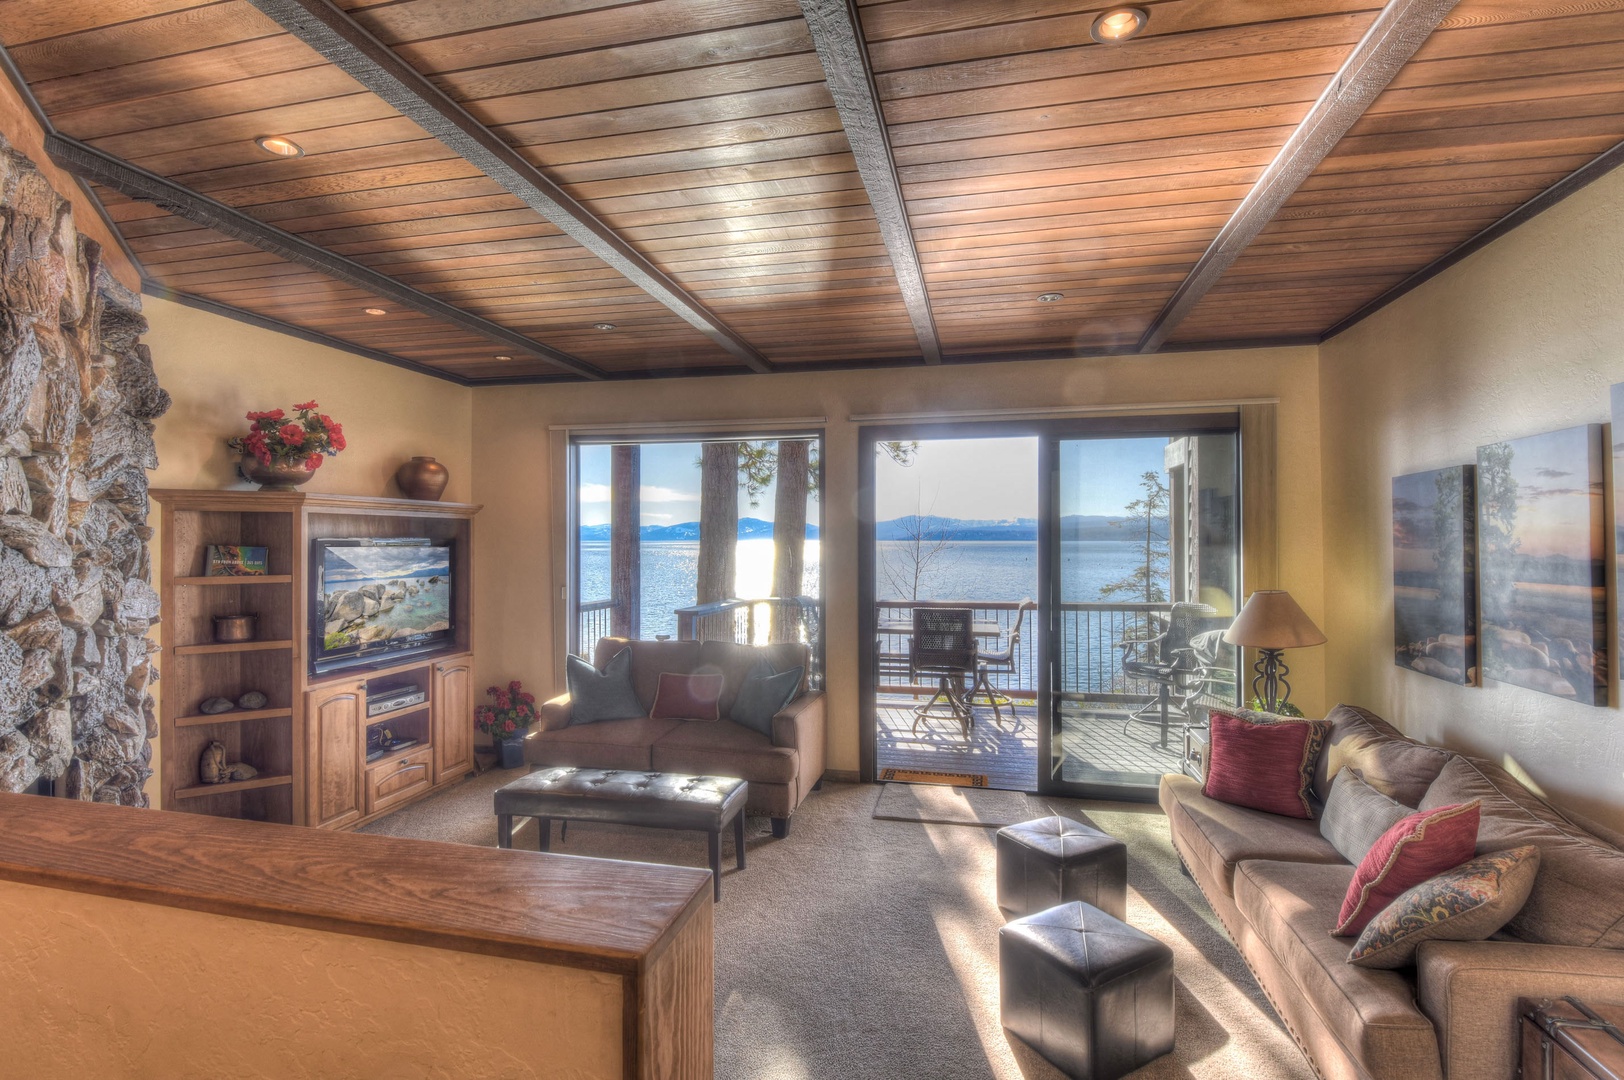 Expansive lake views from everywhere in the living room!